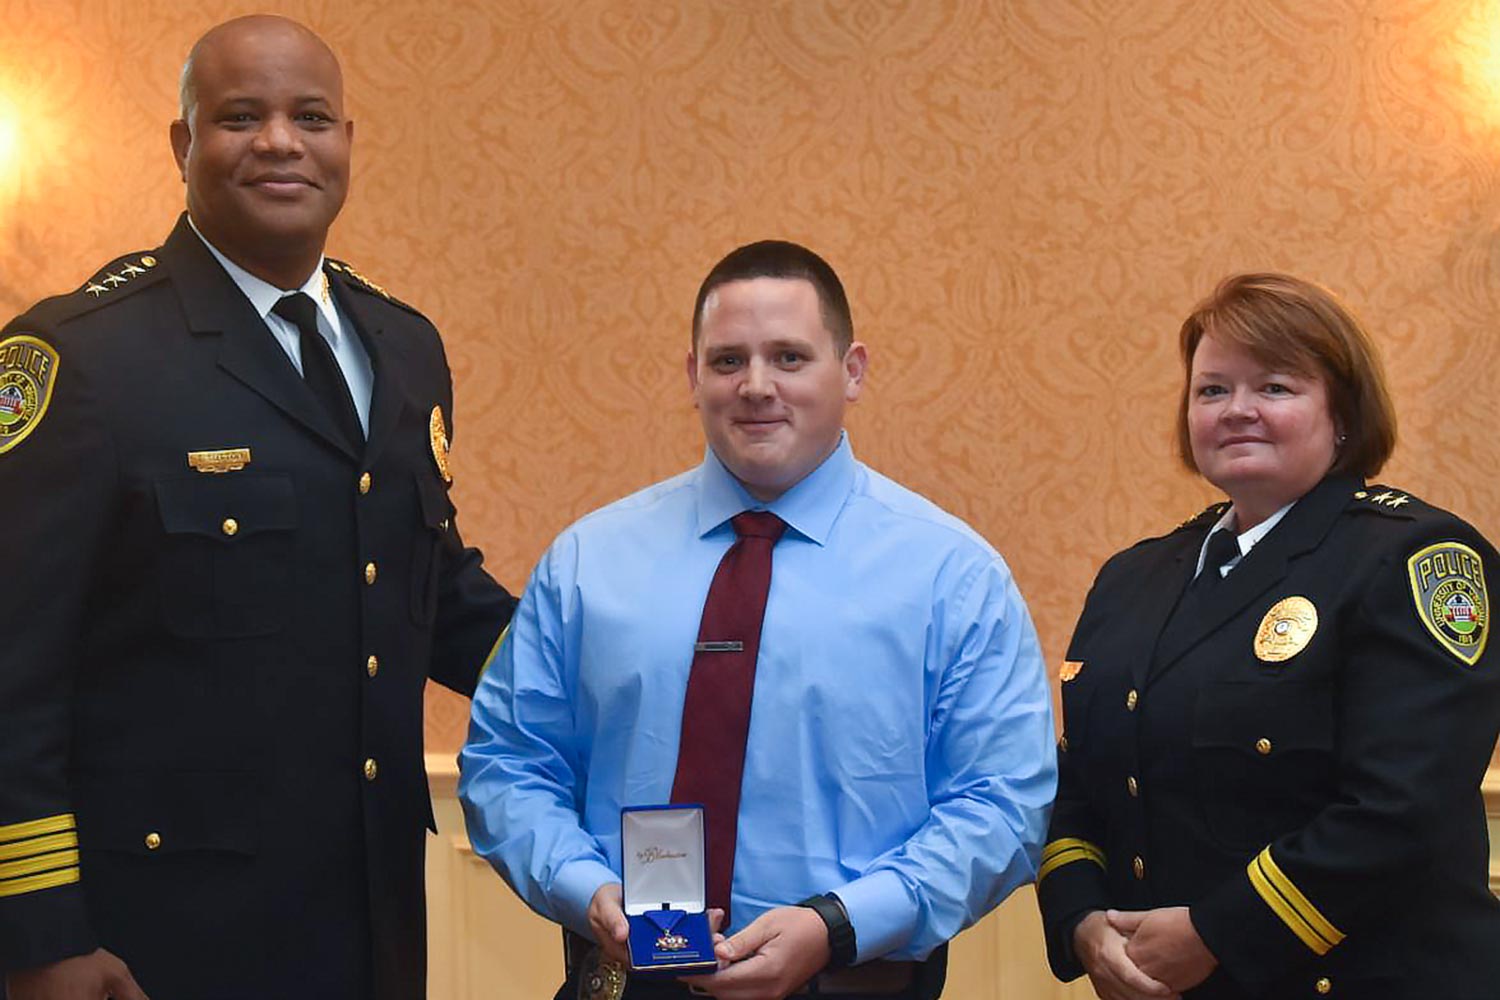 Officer Dean Dotts, center, holds a Medal her won for saving someones life while Chief Tommye Sutton, left, and Deputy Chief Melissa Fielding stand next to him